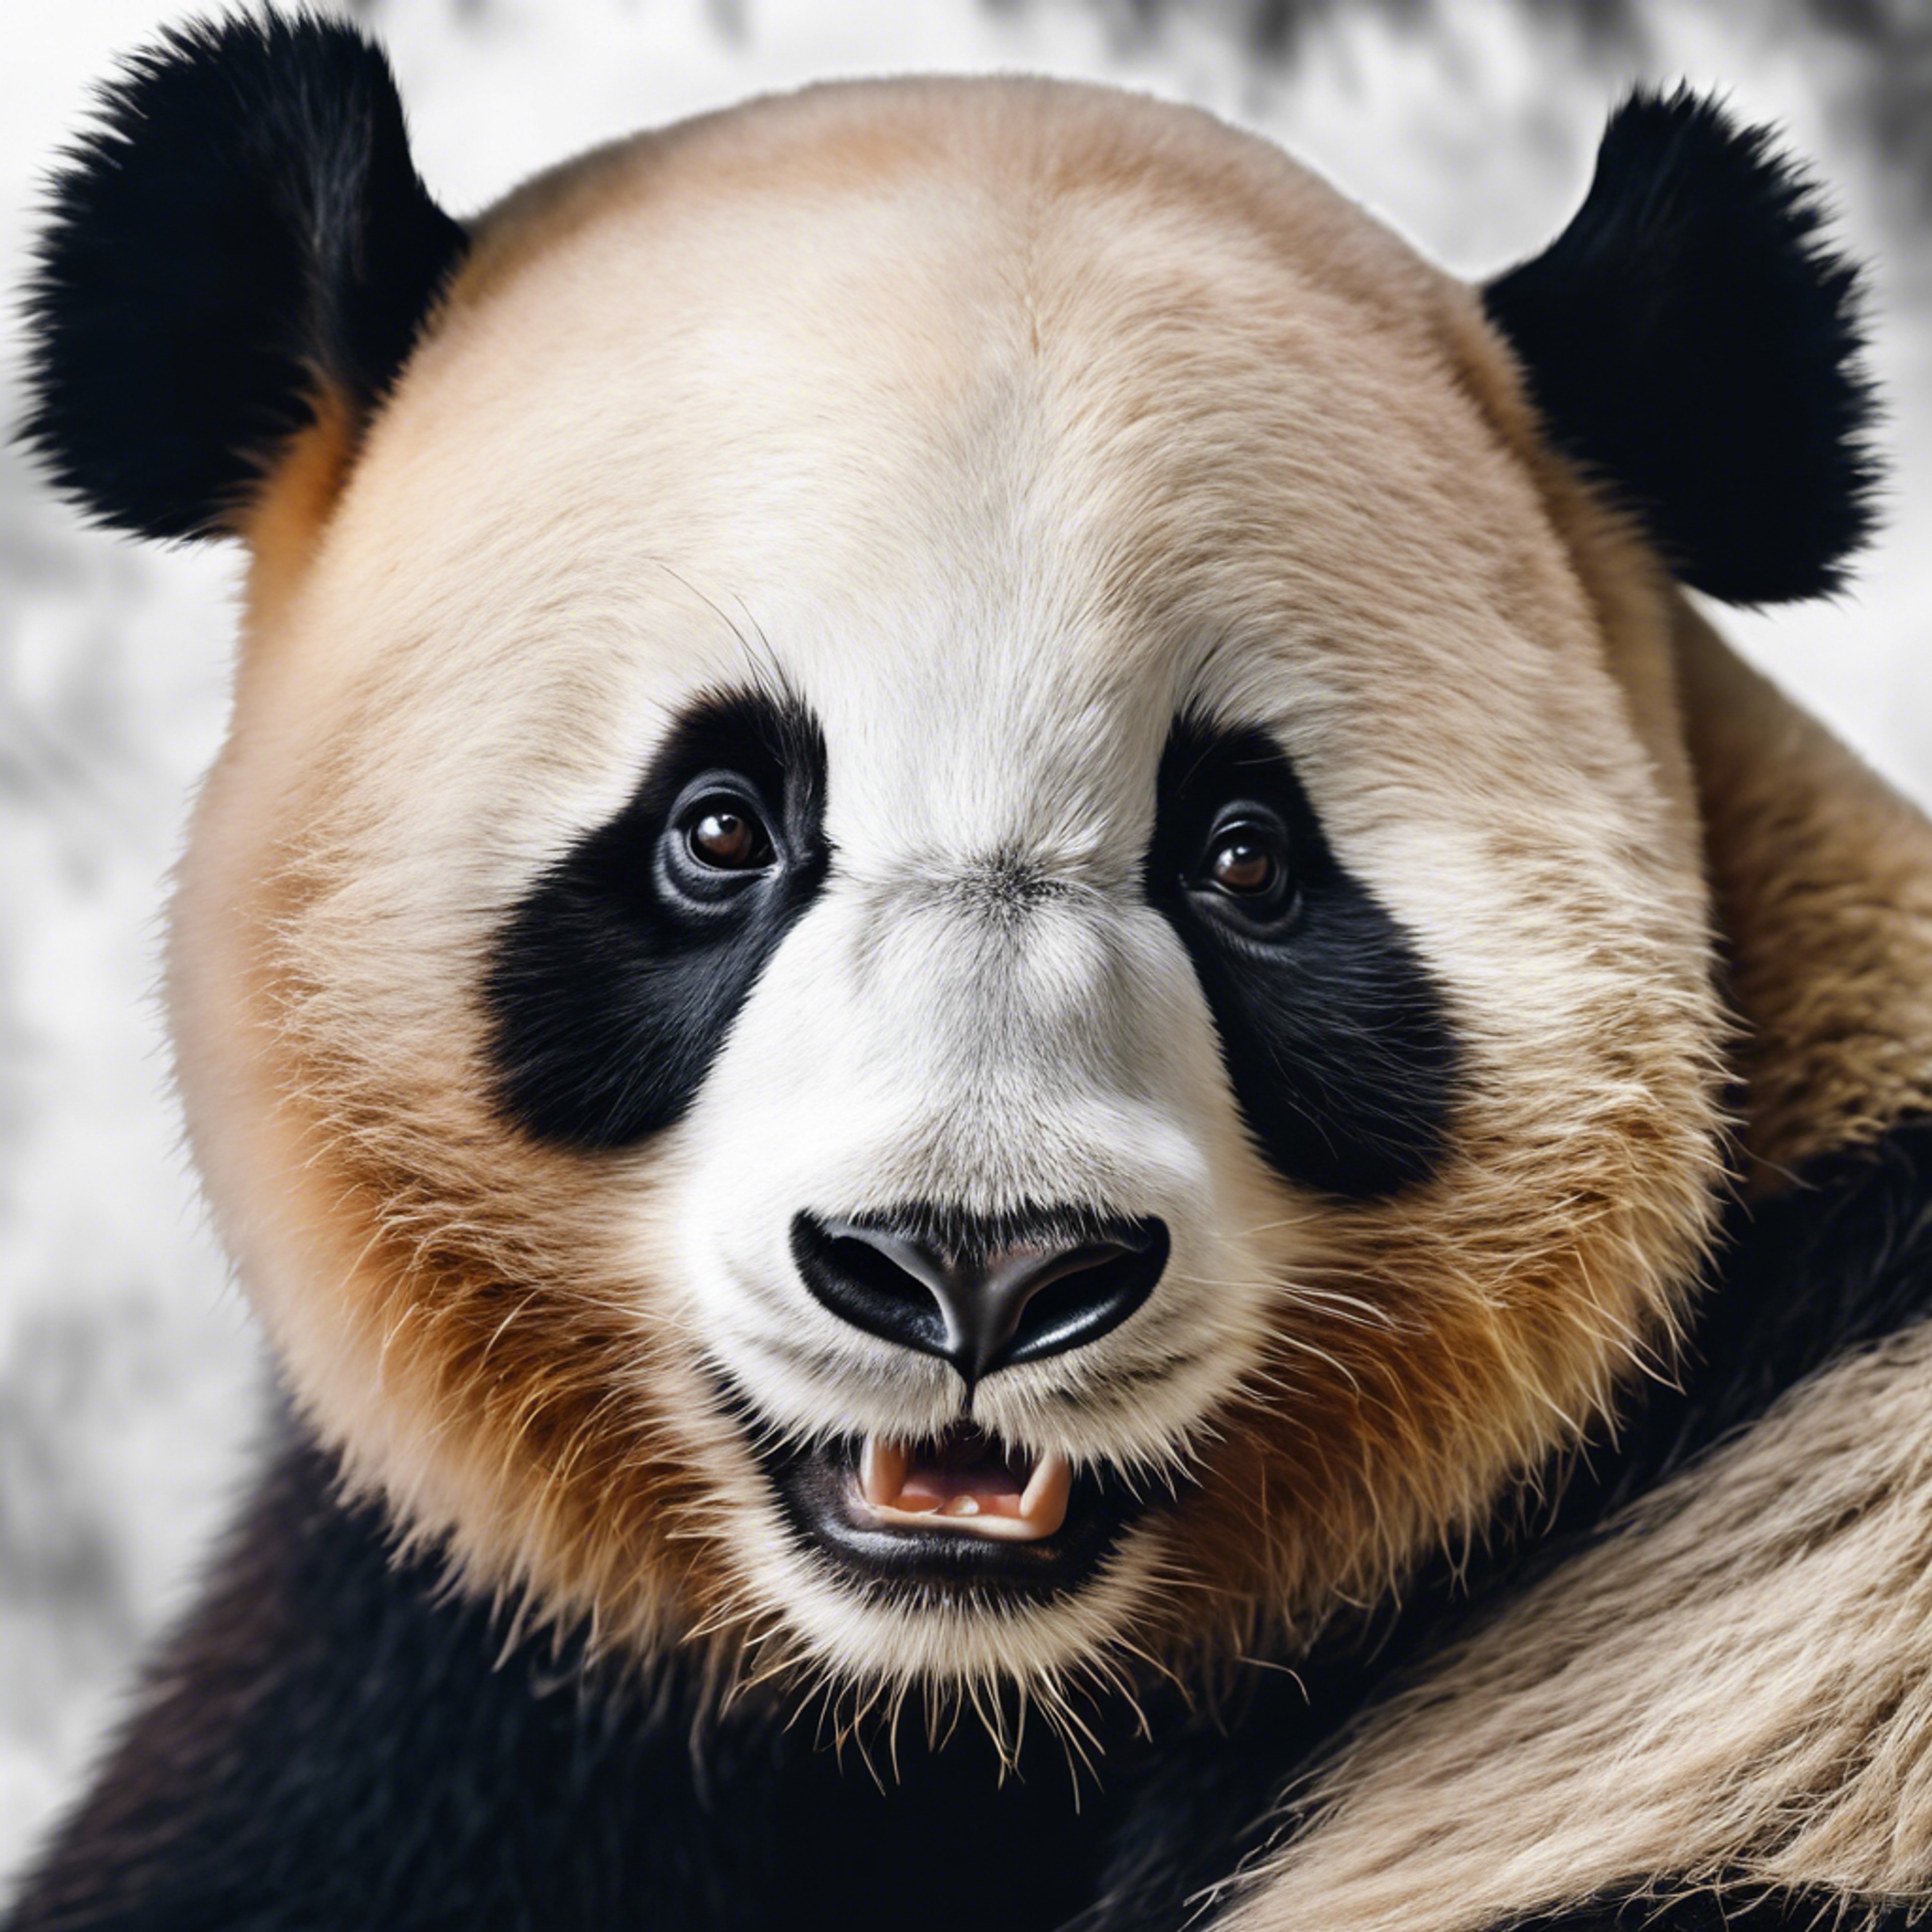 A close-up portrait of a smiling panda, showcasing the joy and charm of this magnificent creature. Tapeta[5b22781787714e61bfbc]